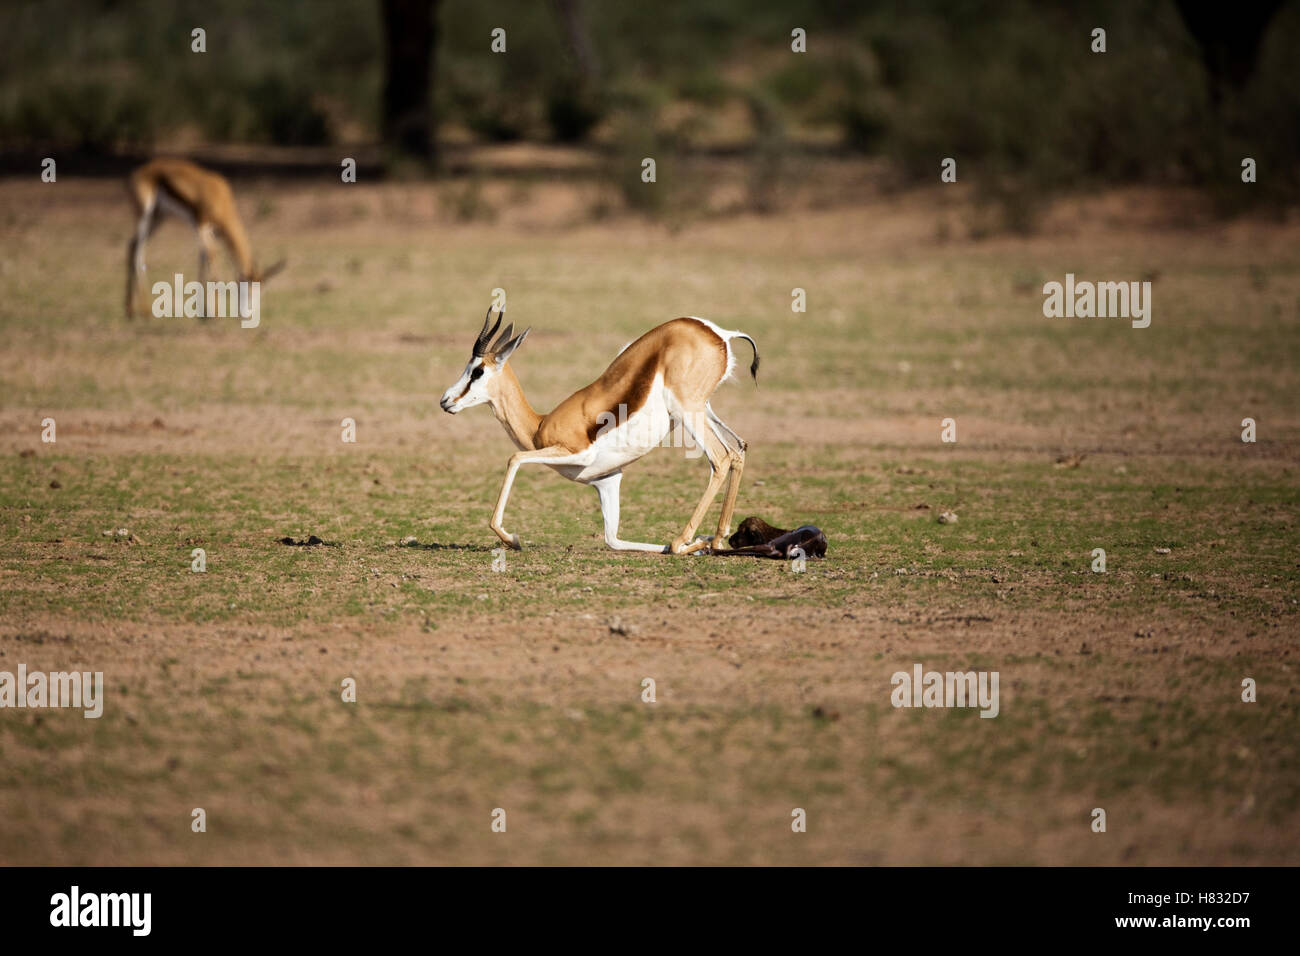 Springbok (Antidorcas marsupialis) female standing immediately after giving birth, Kgalagadi Transfrontier Park, South Africa, Stock Photo